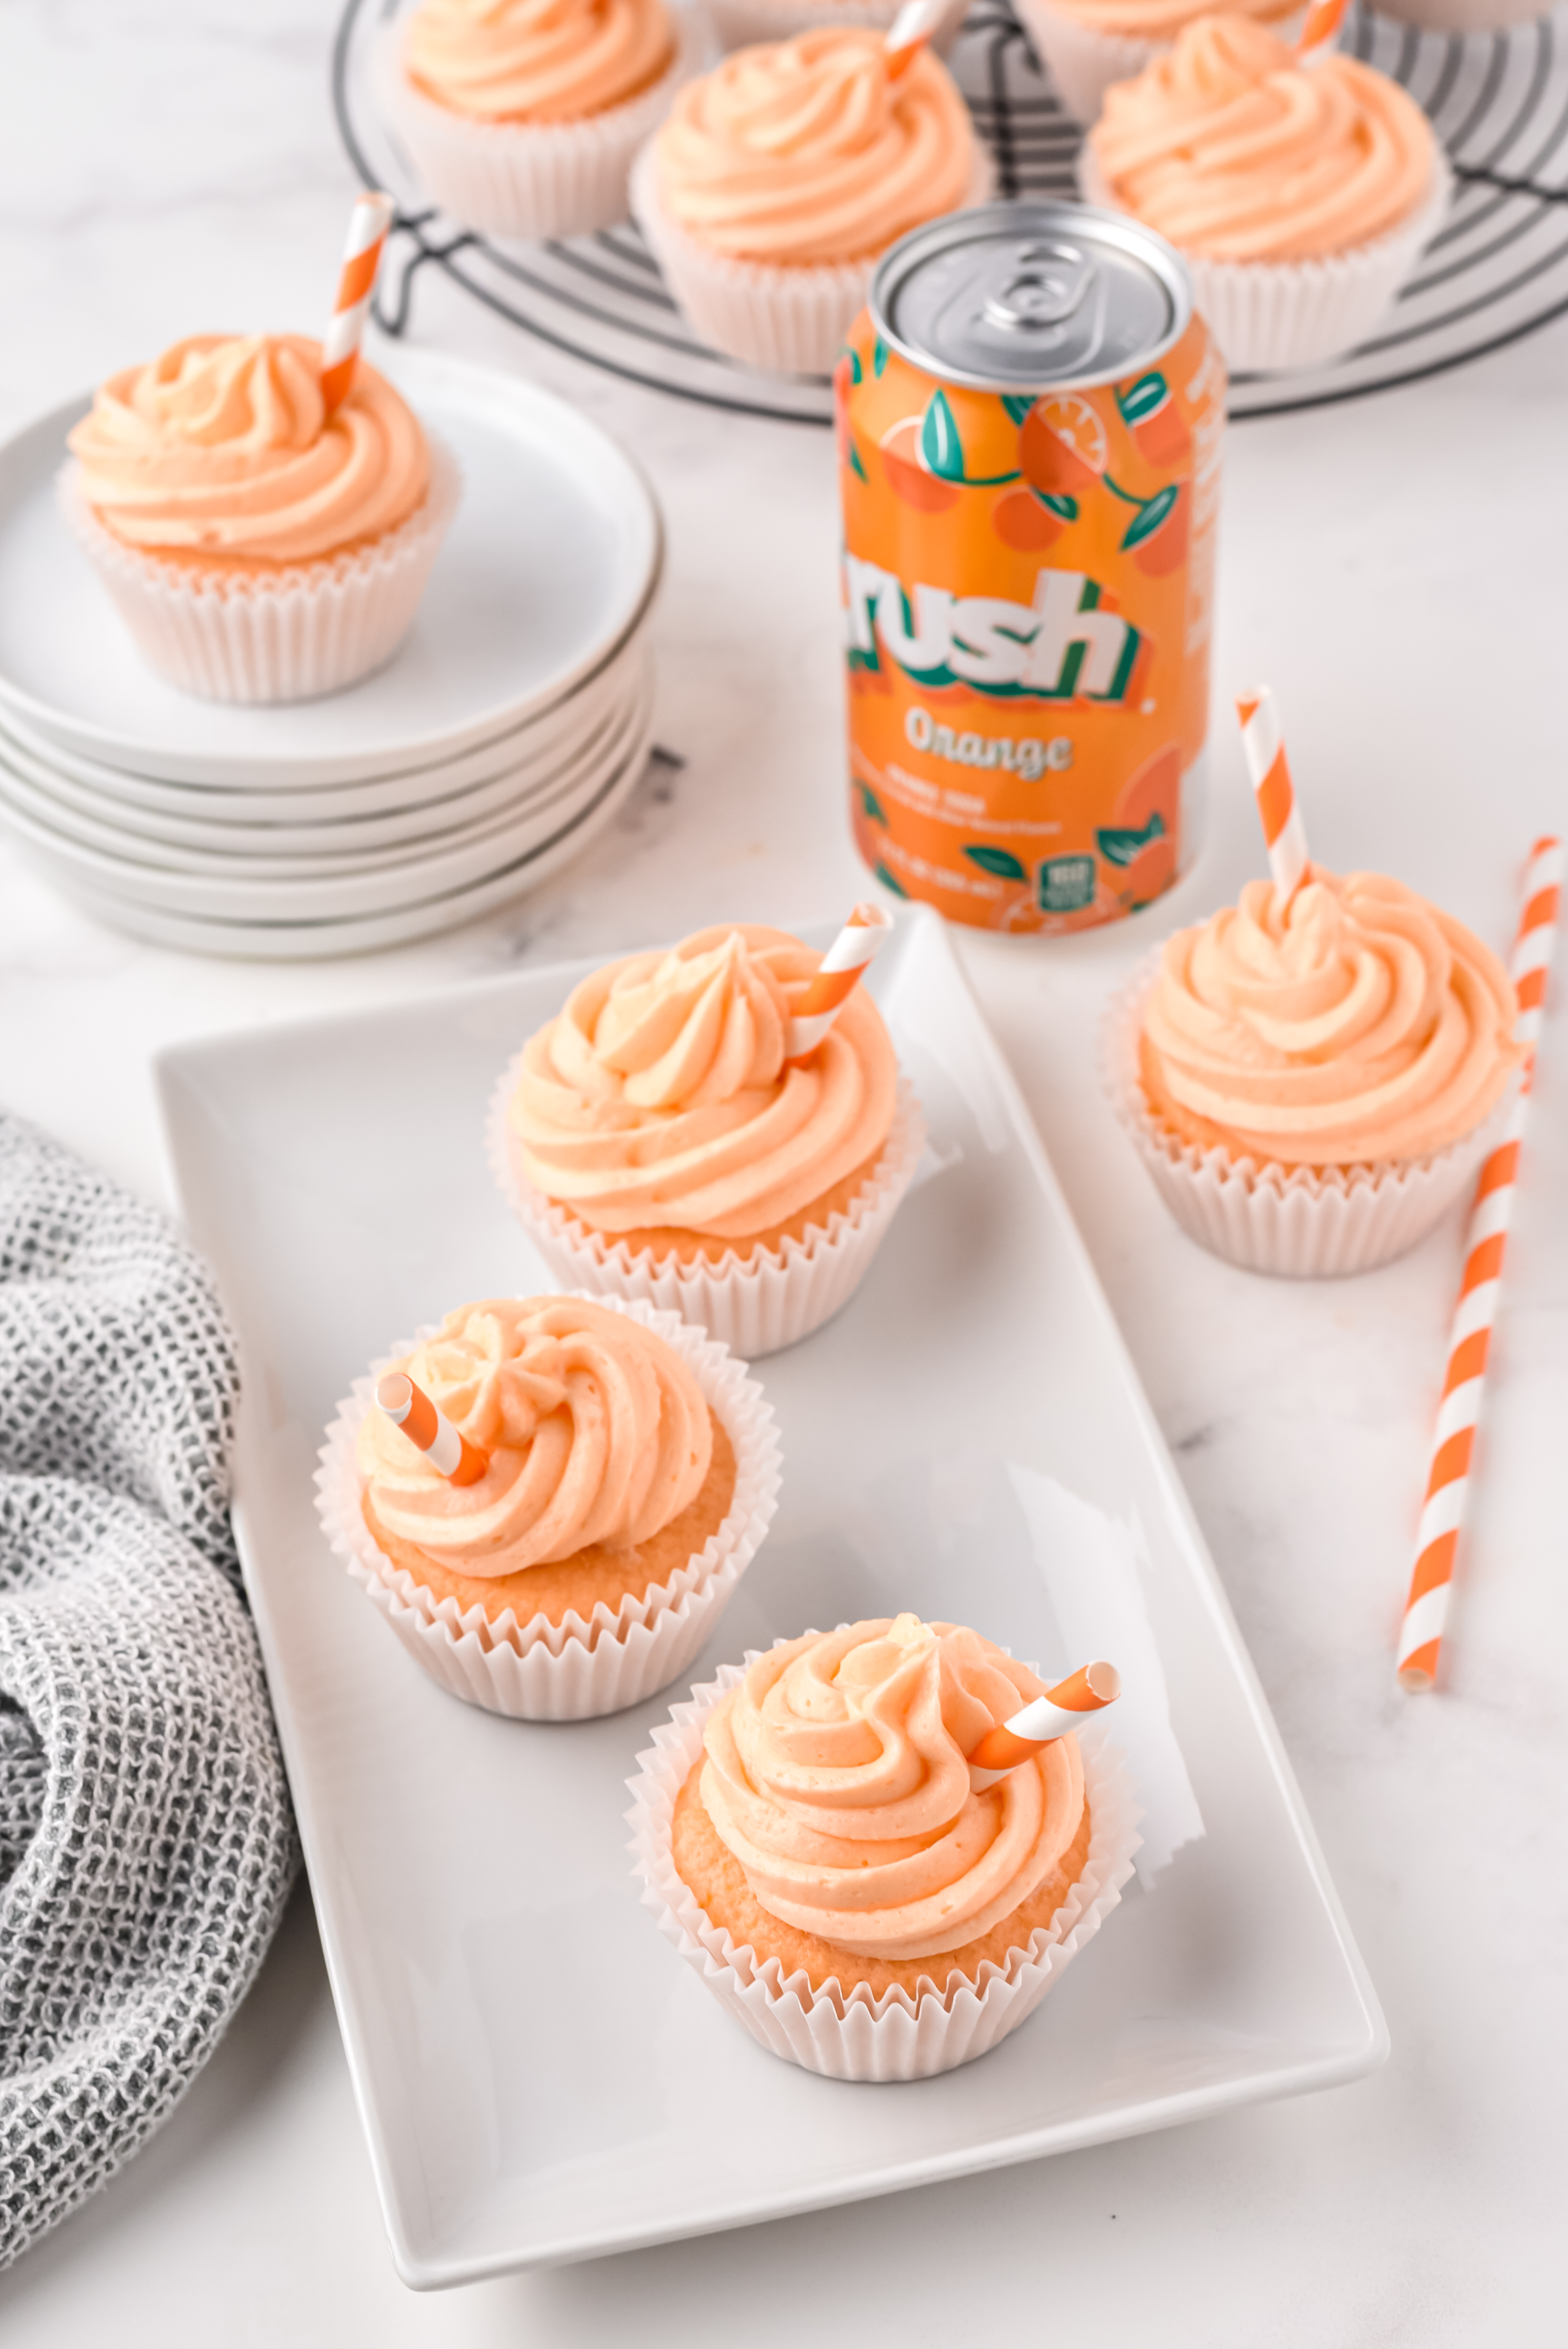 Cupcakes with orange frosting and mini stripy straws in them on a white rectangle plate, with a can of orange crush soda next to it and other orange crush cupcakes on the table with it.